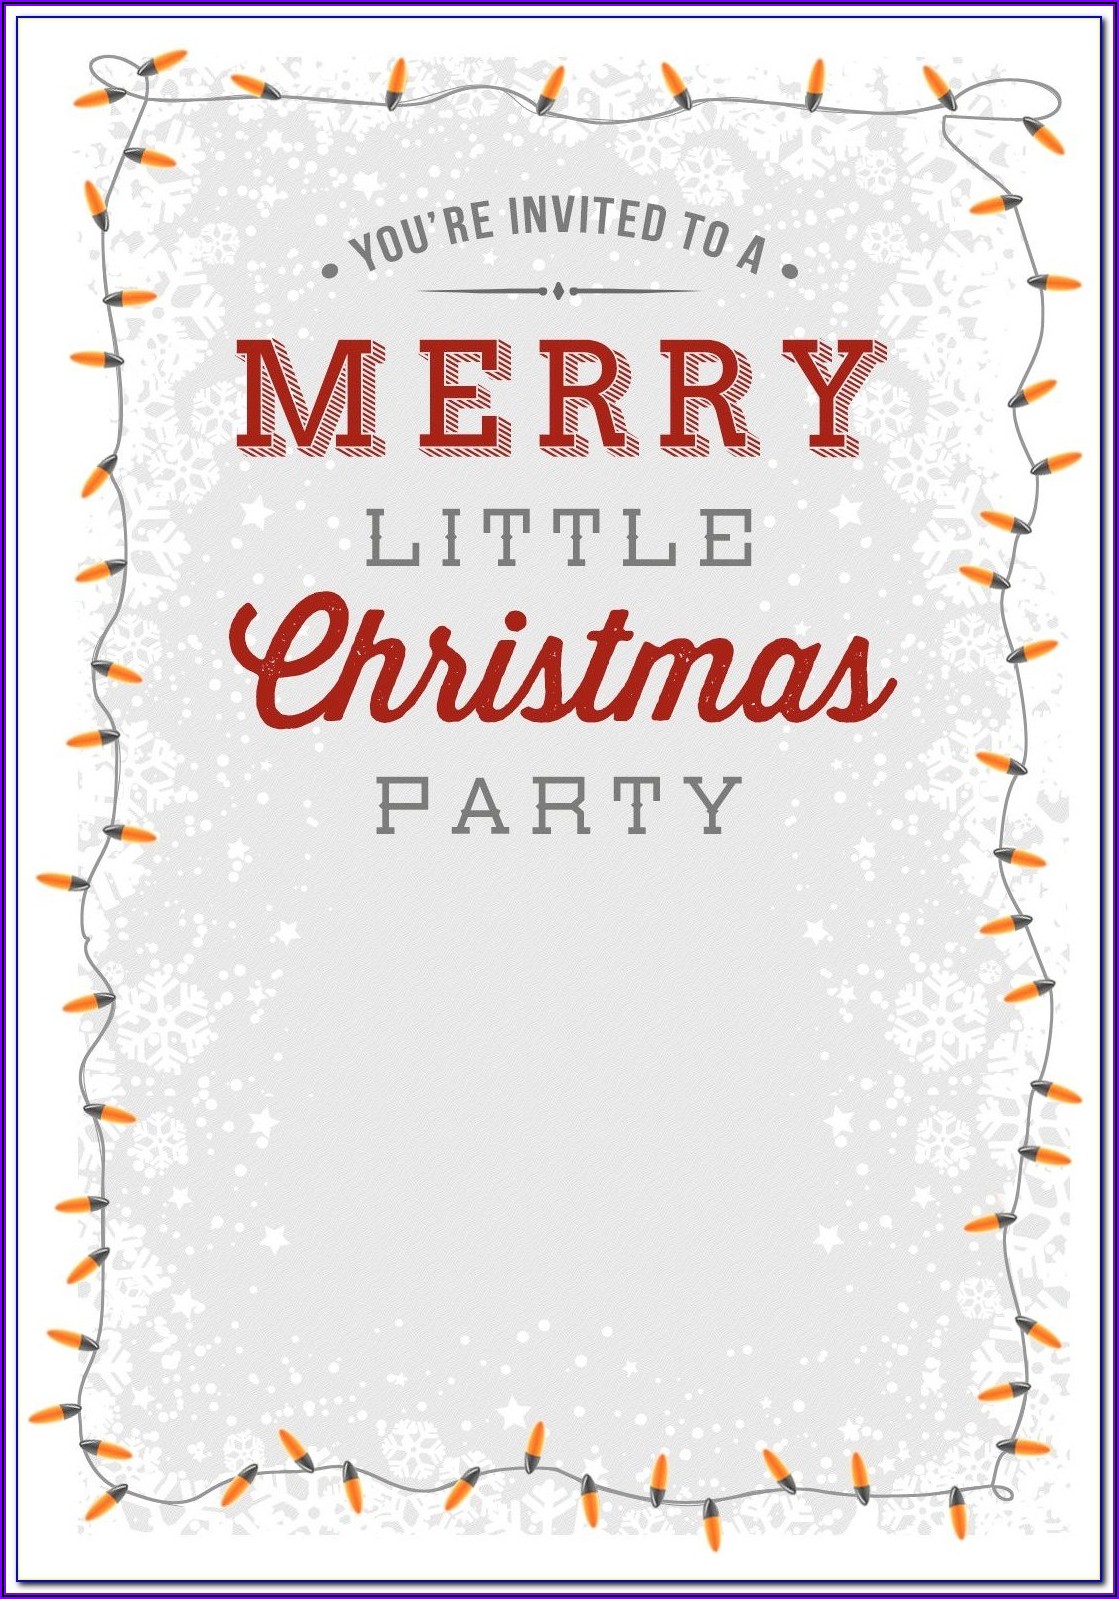 Office Christmas Party Flyer Templates